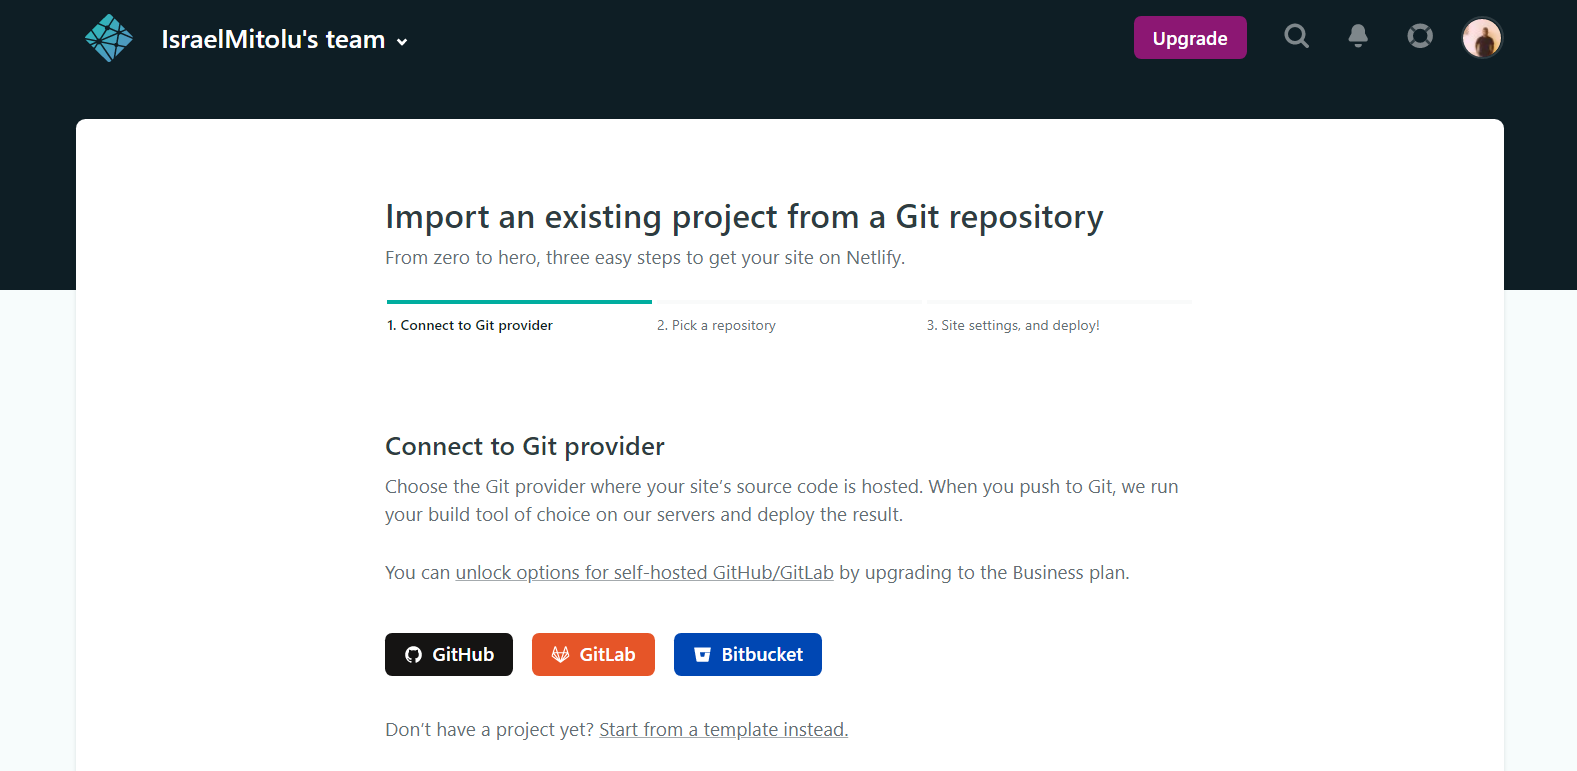 Connect to a Git provider